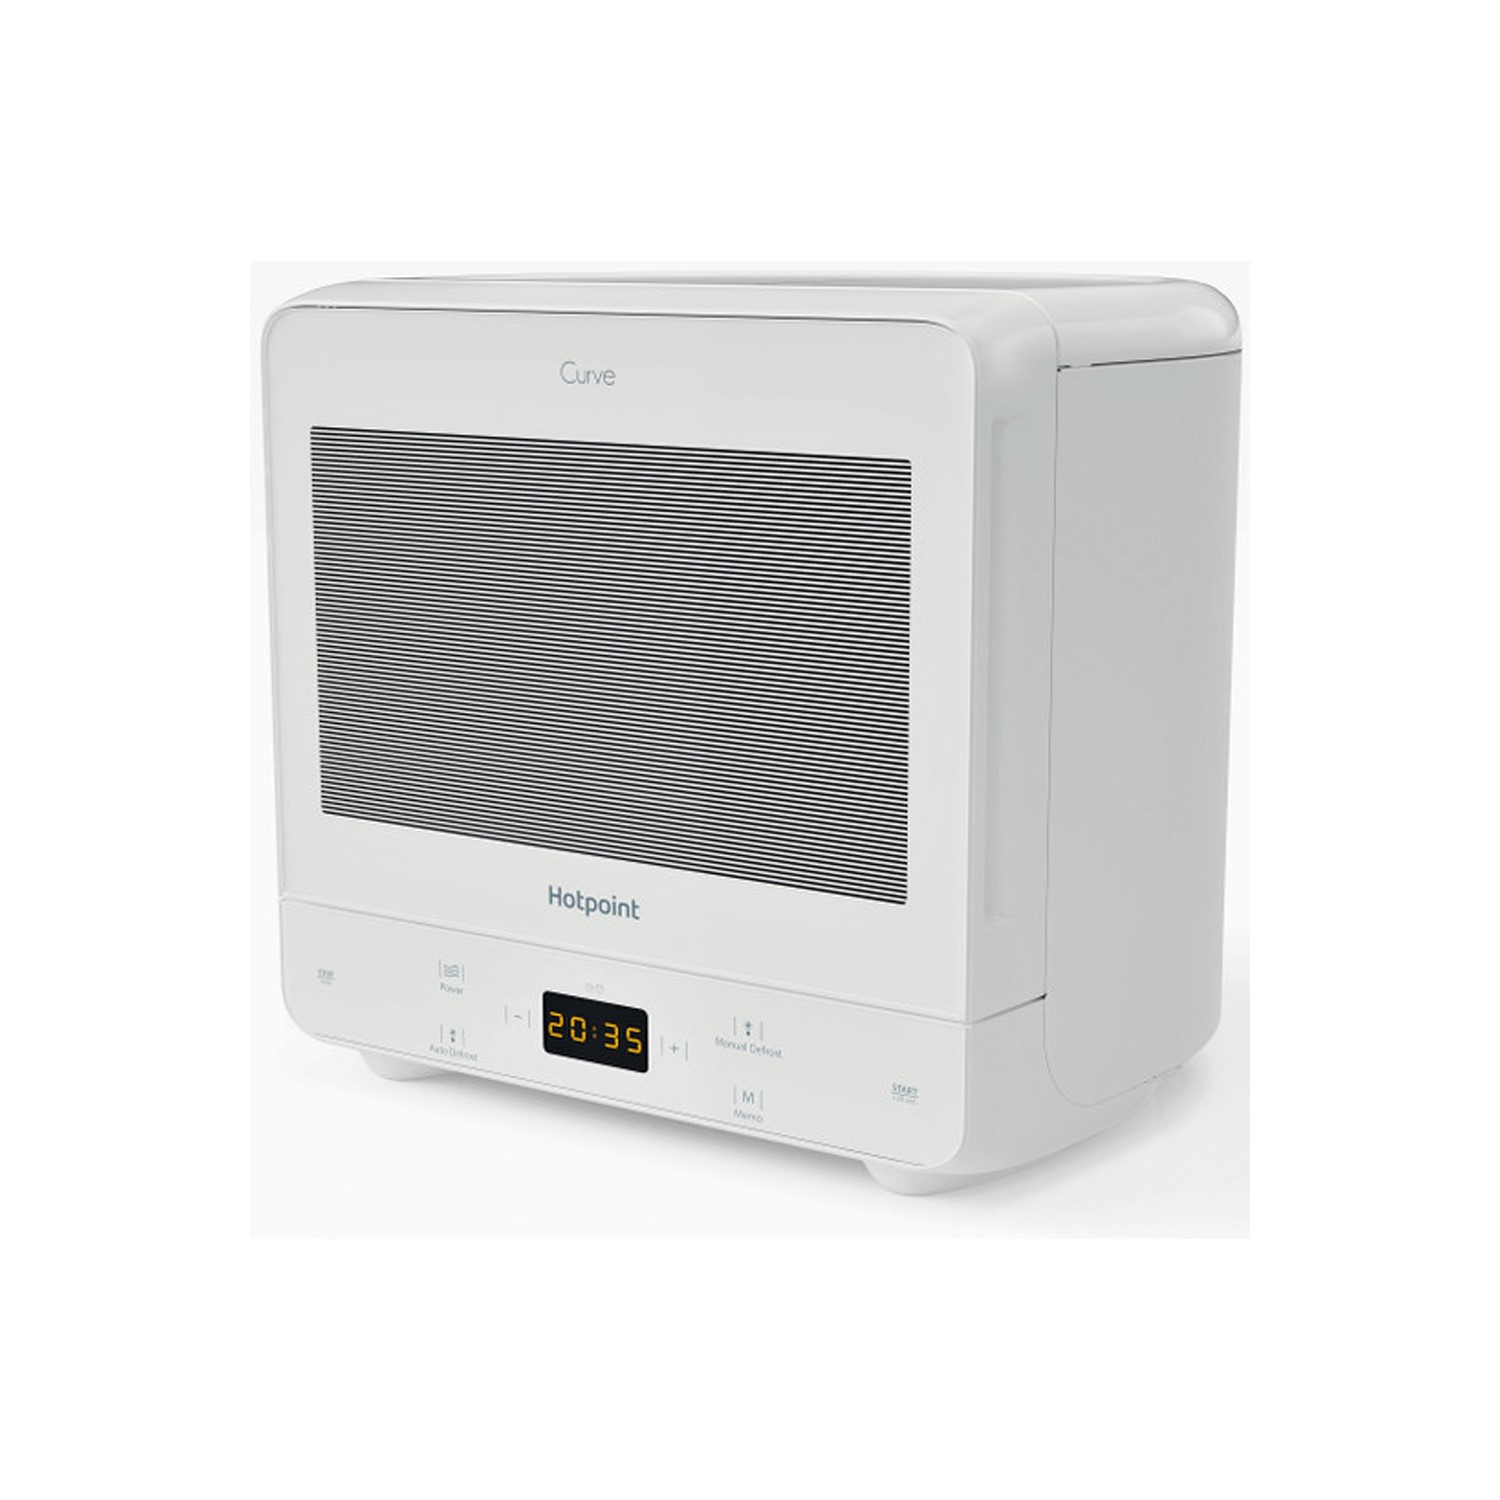 Hotpoint MWH1331W Xtraspace Curve 13L Digital Microwave - White